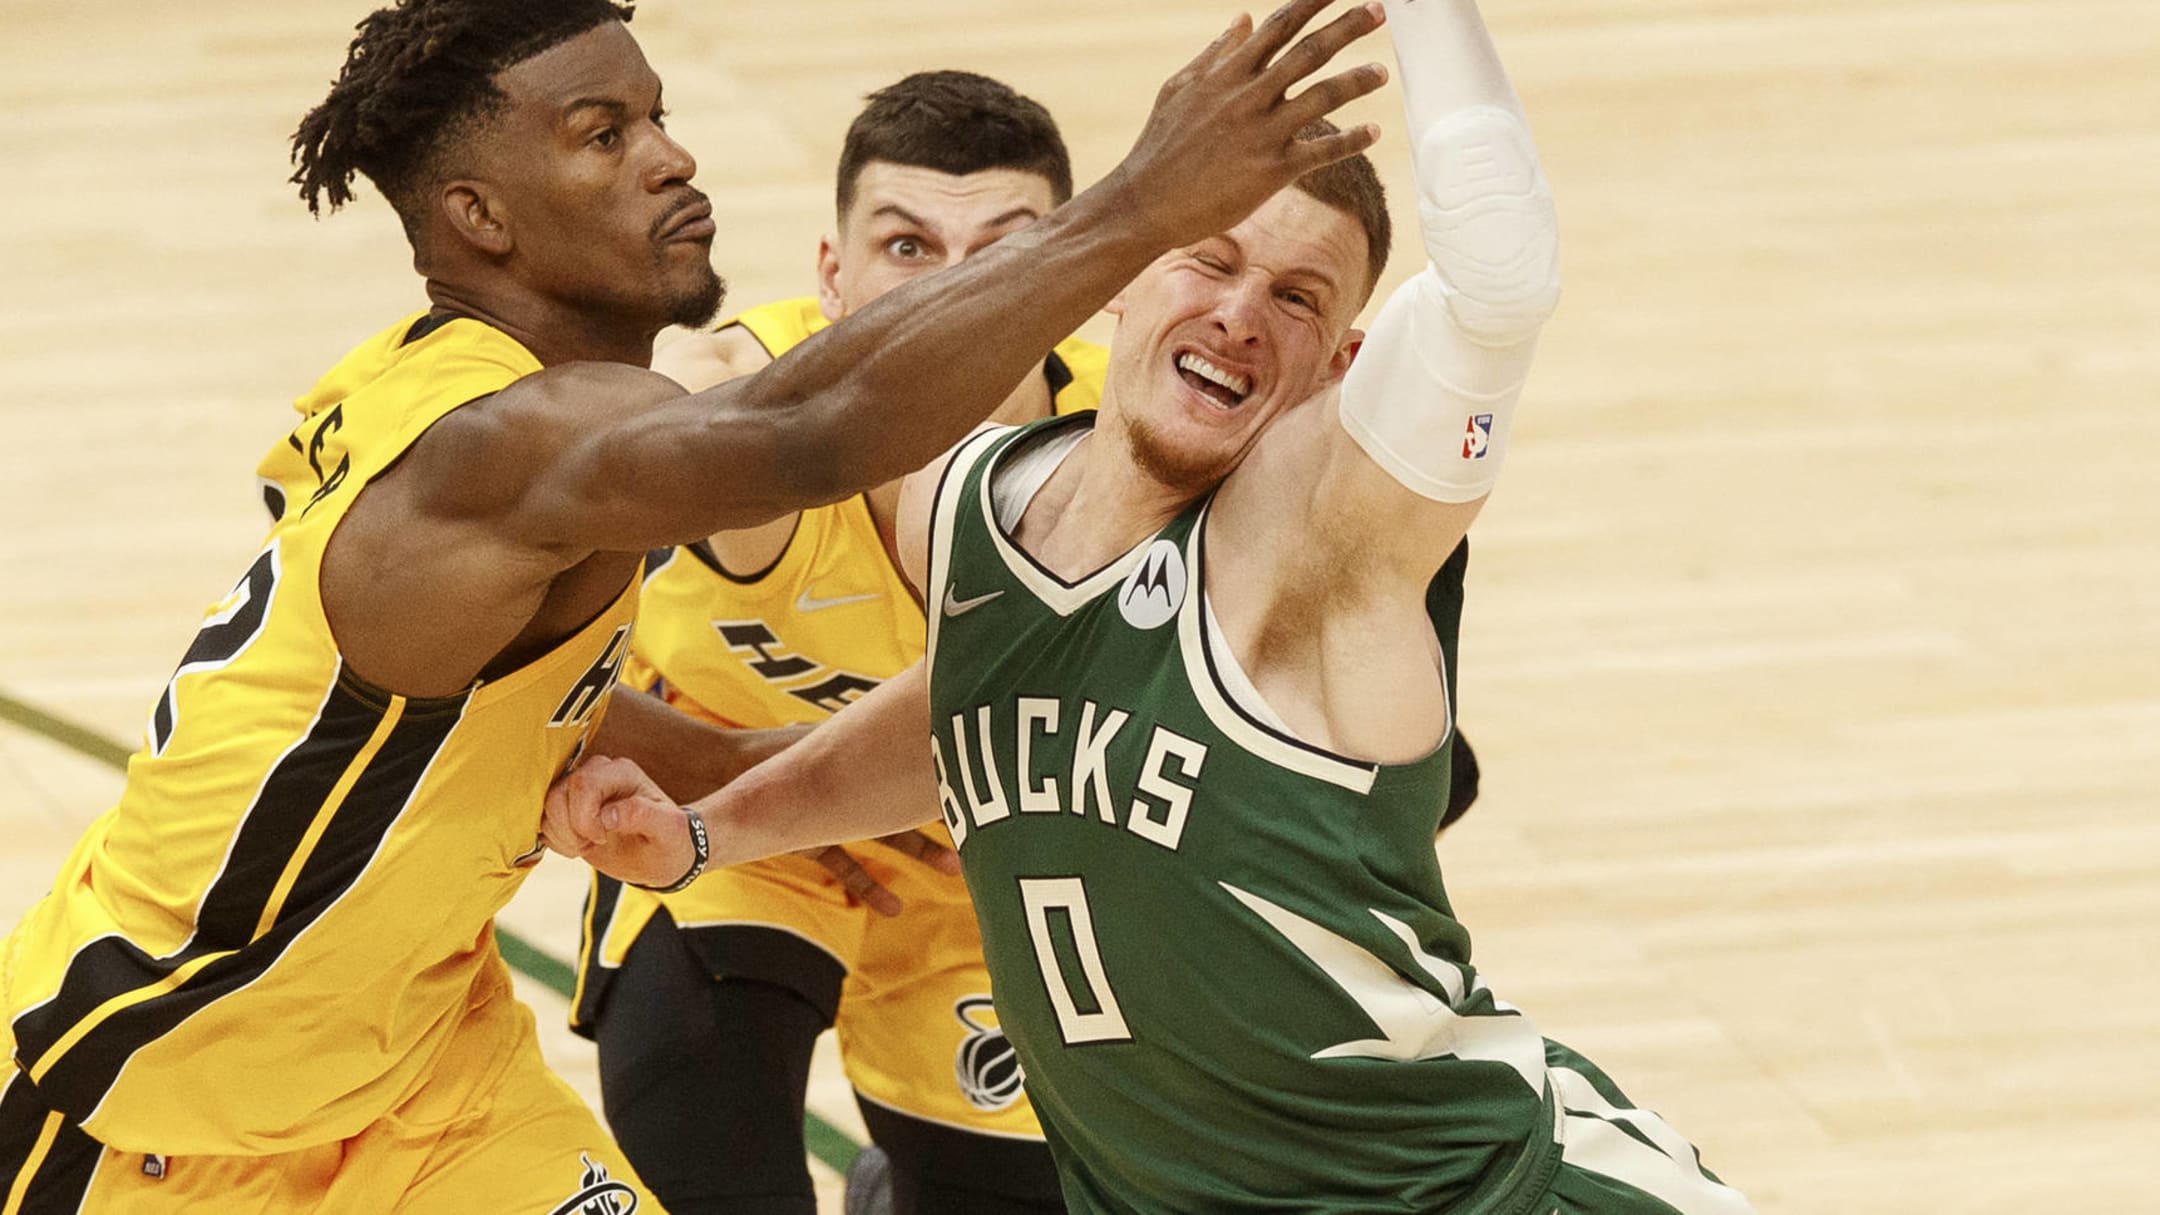 Injured Bucks guard Donte DiVincenzo out for NBA playoffs